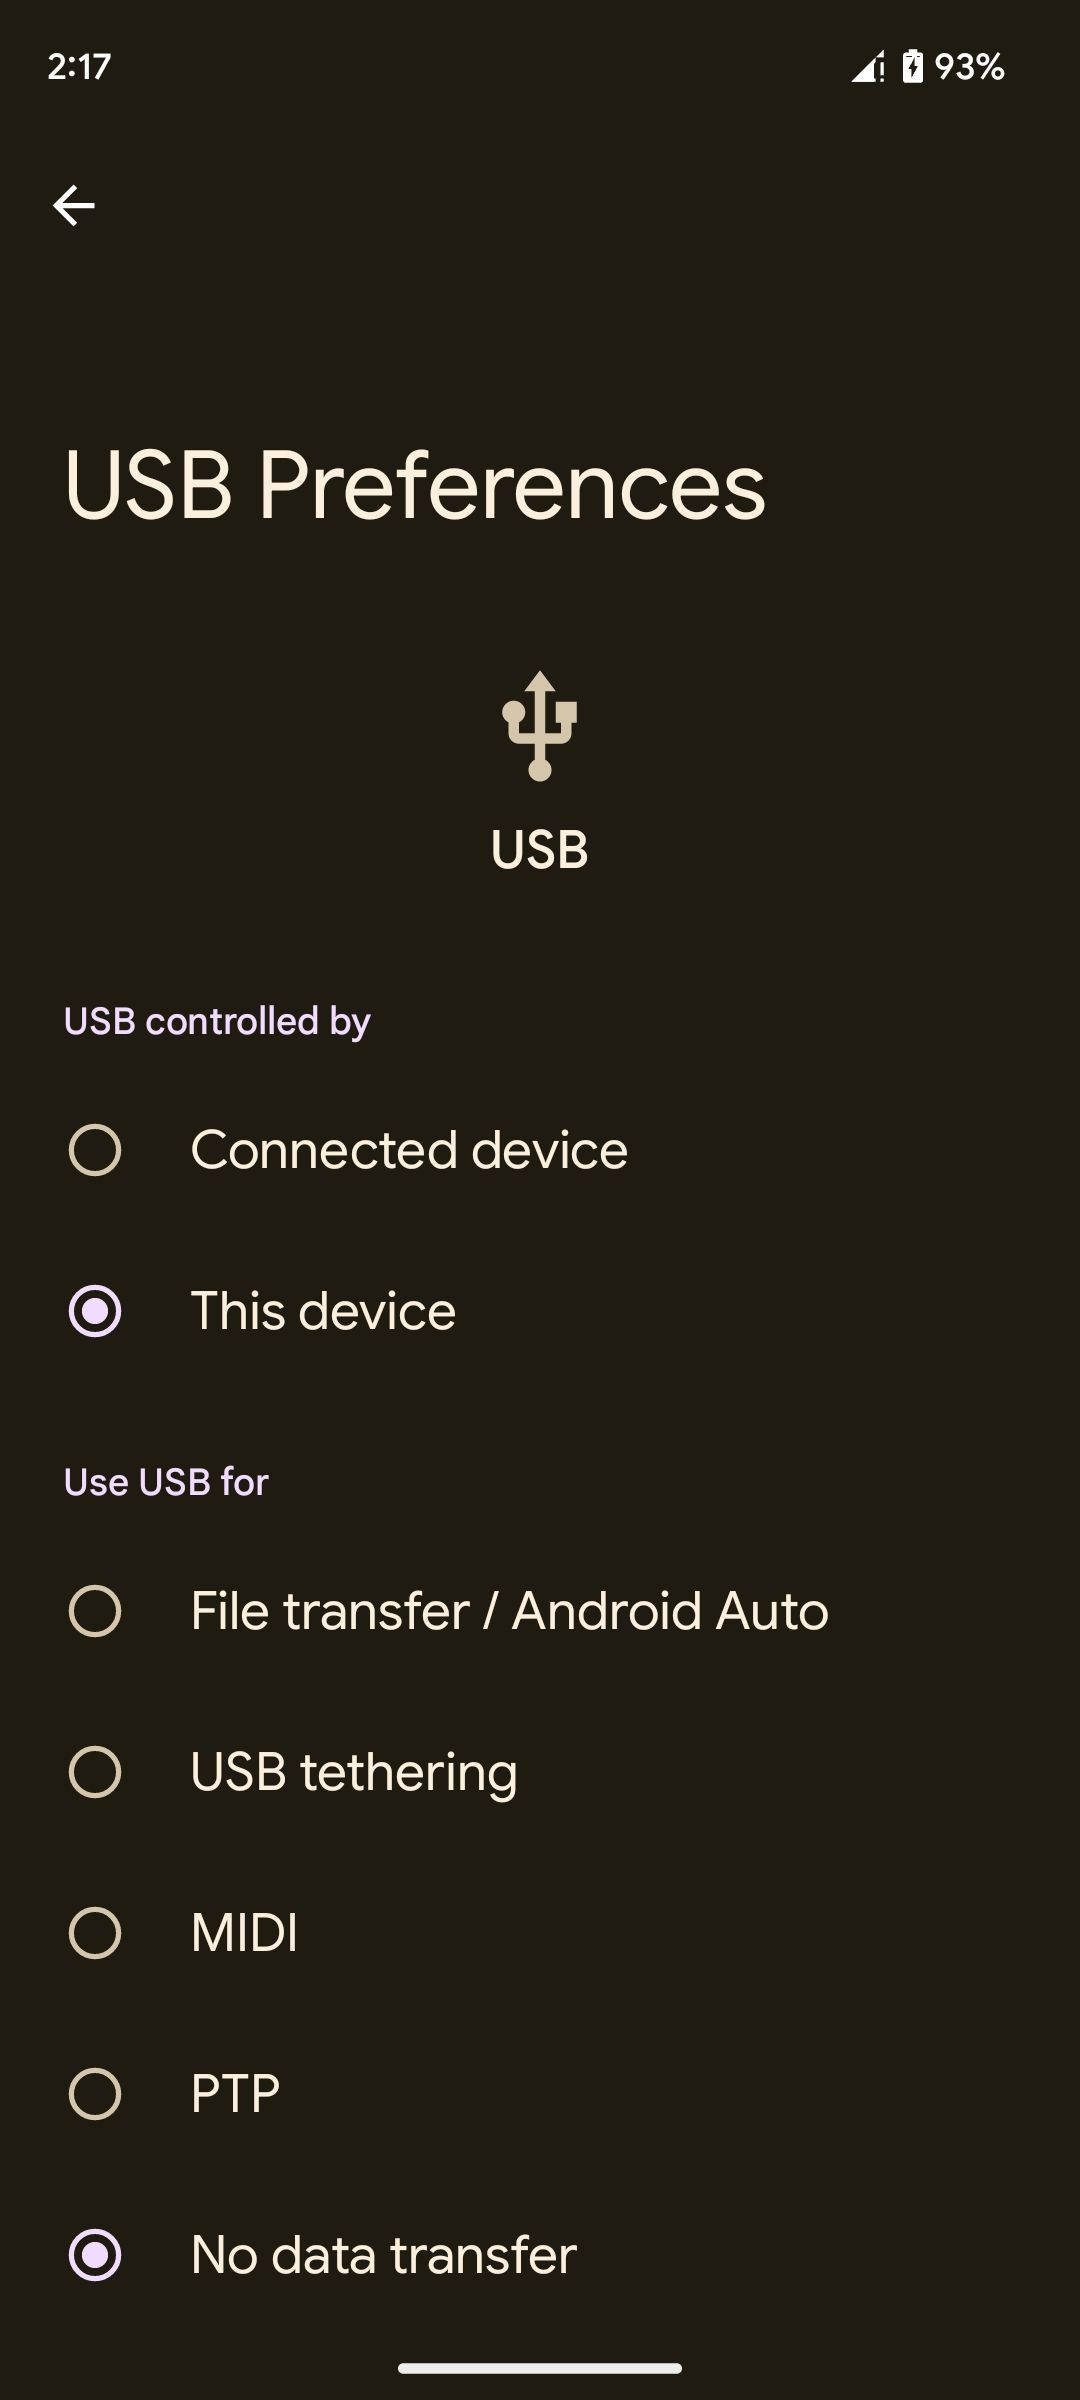 USB preferences settings page on Android